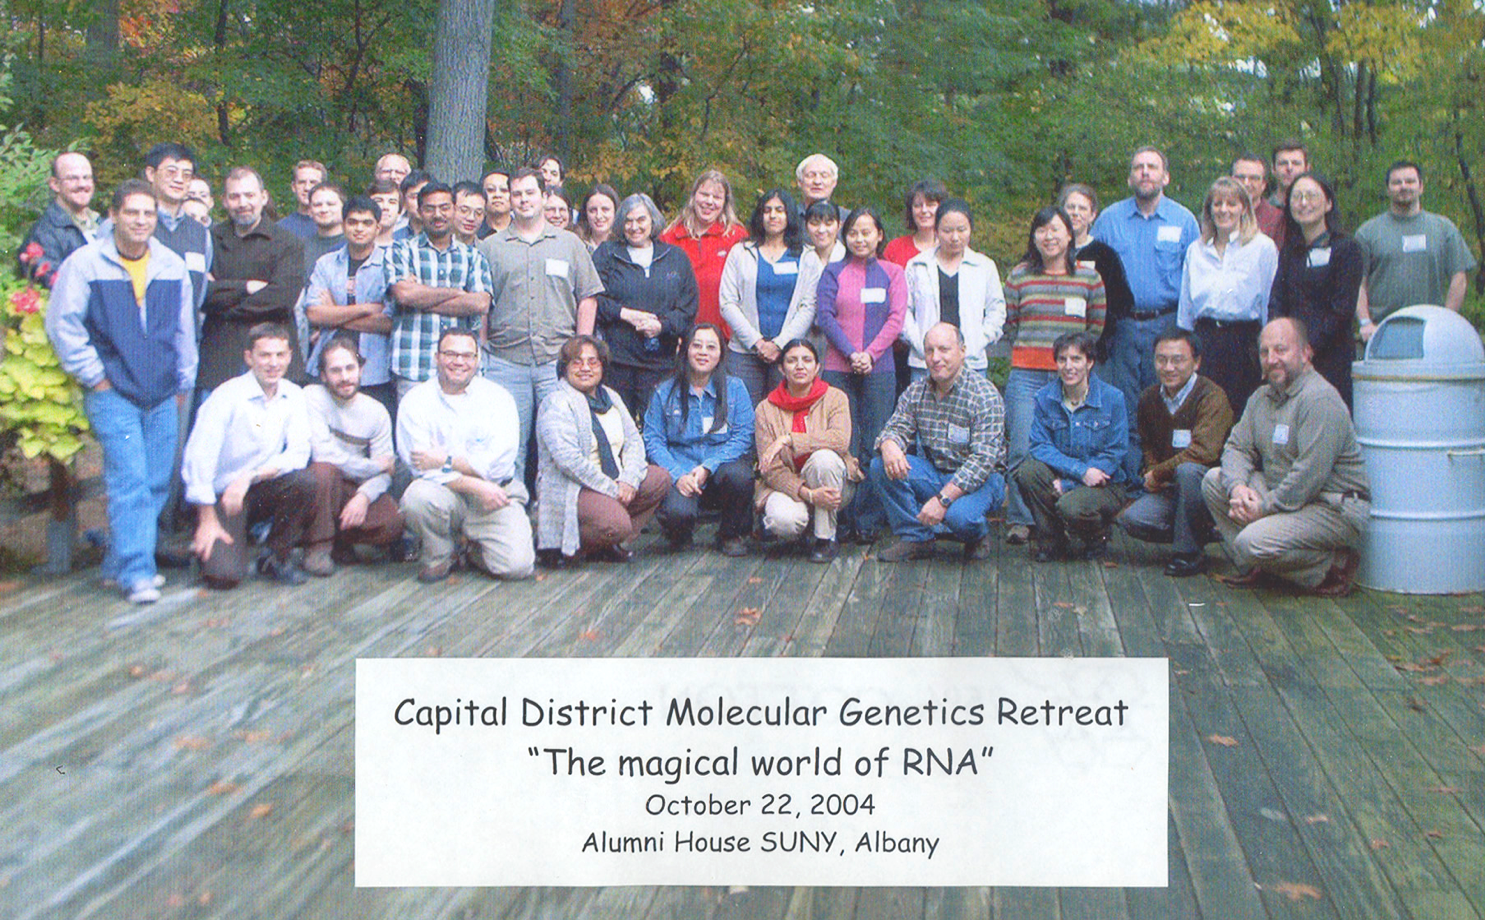 RNA researchers at The Magical World of RNA retreat Oct 22, 2004